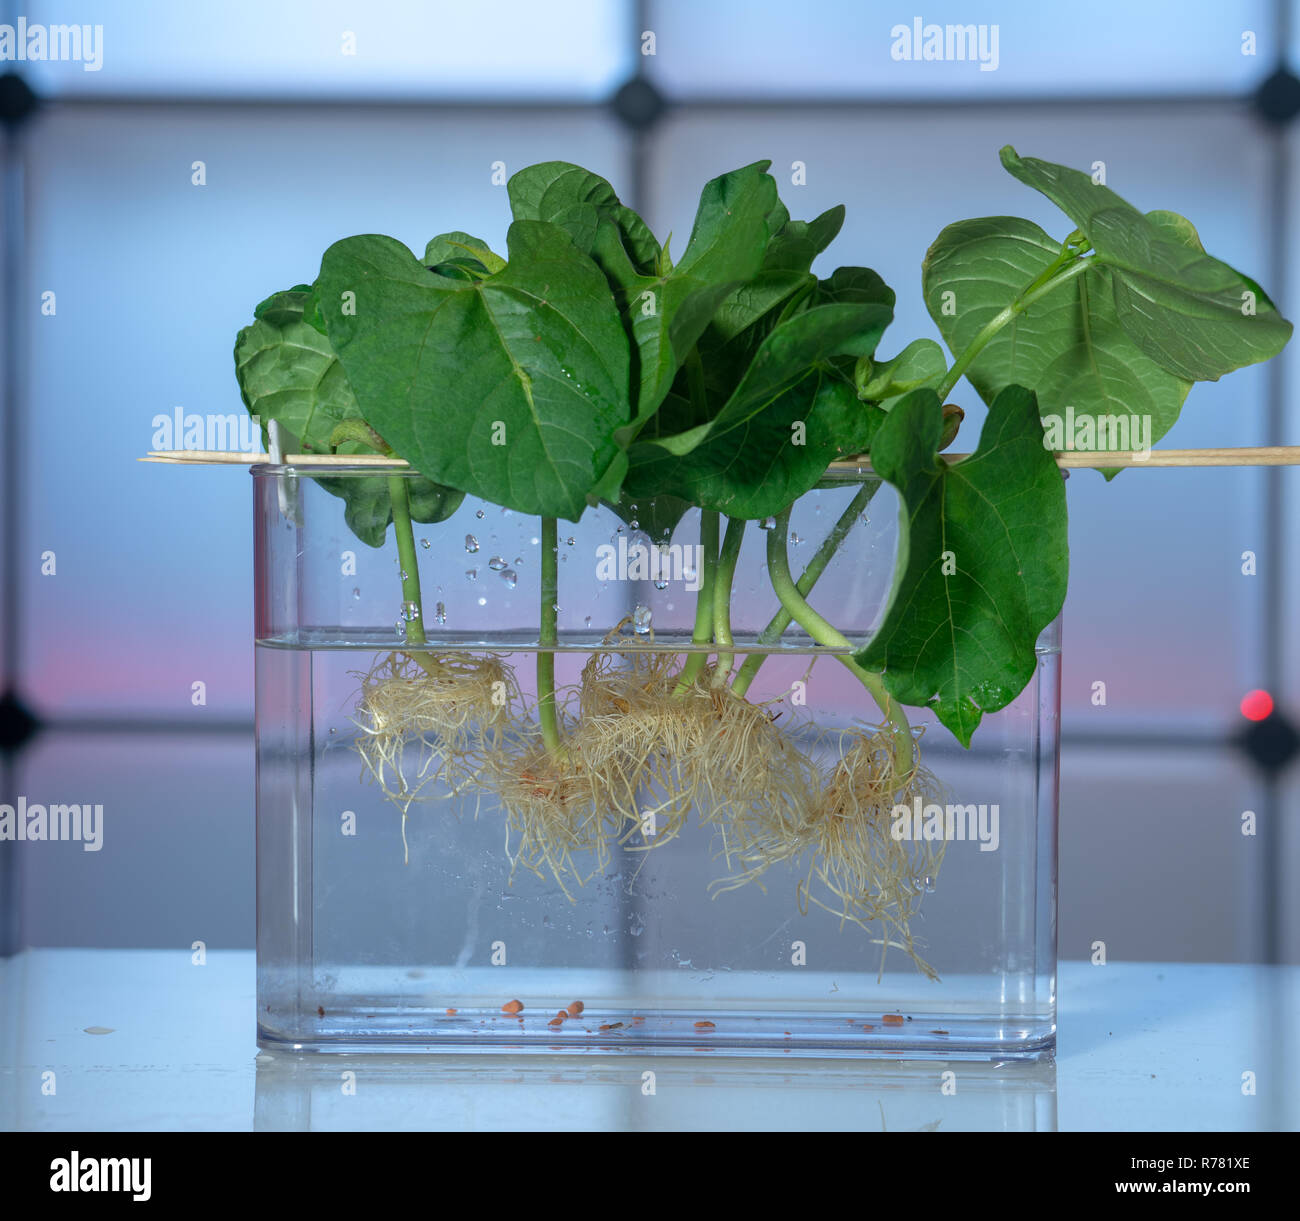 Growing plants by hydroponics in water with chemicals Stock Photo